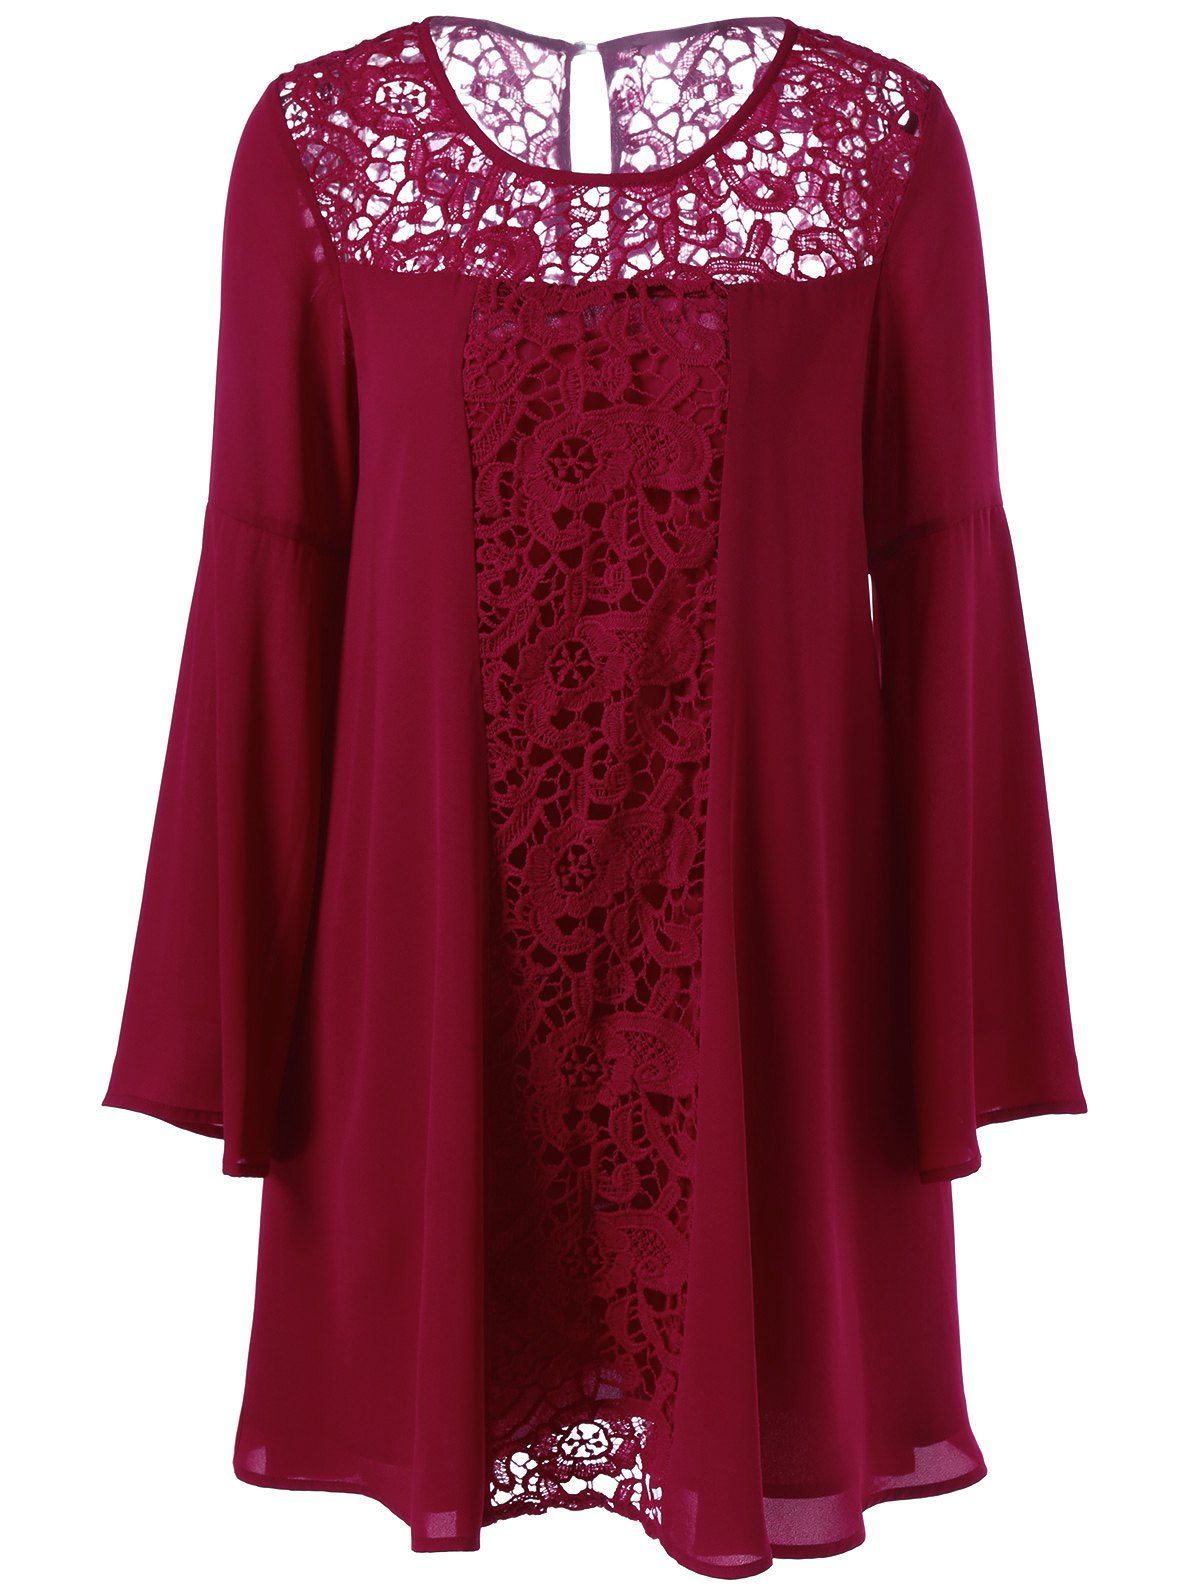 [17% OFF] 2020 Lace Panel Flare Sleeves Tunic Blouse In DEEP RED ...